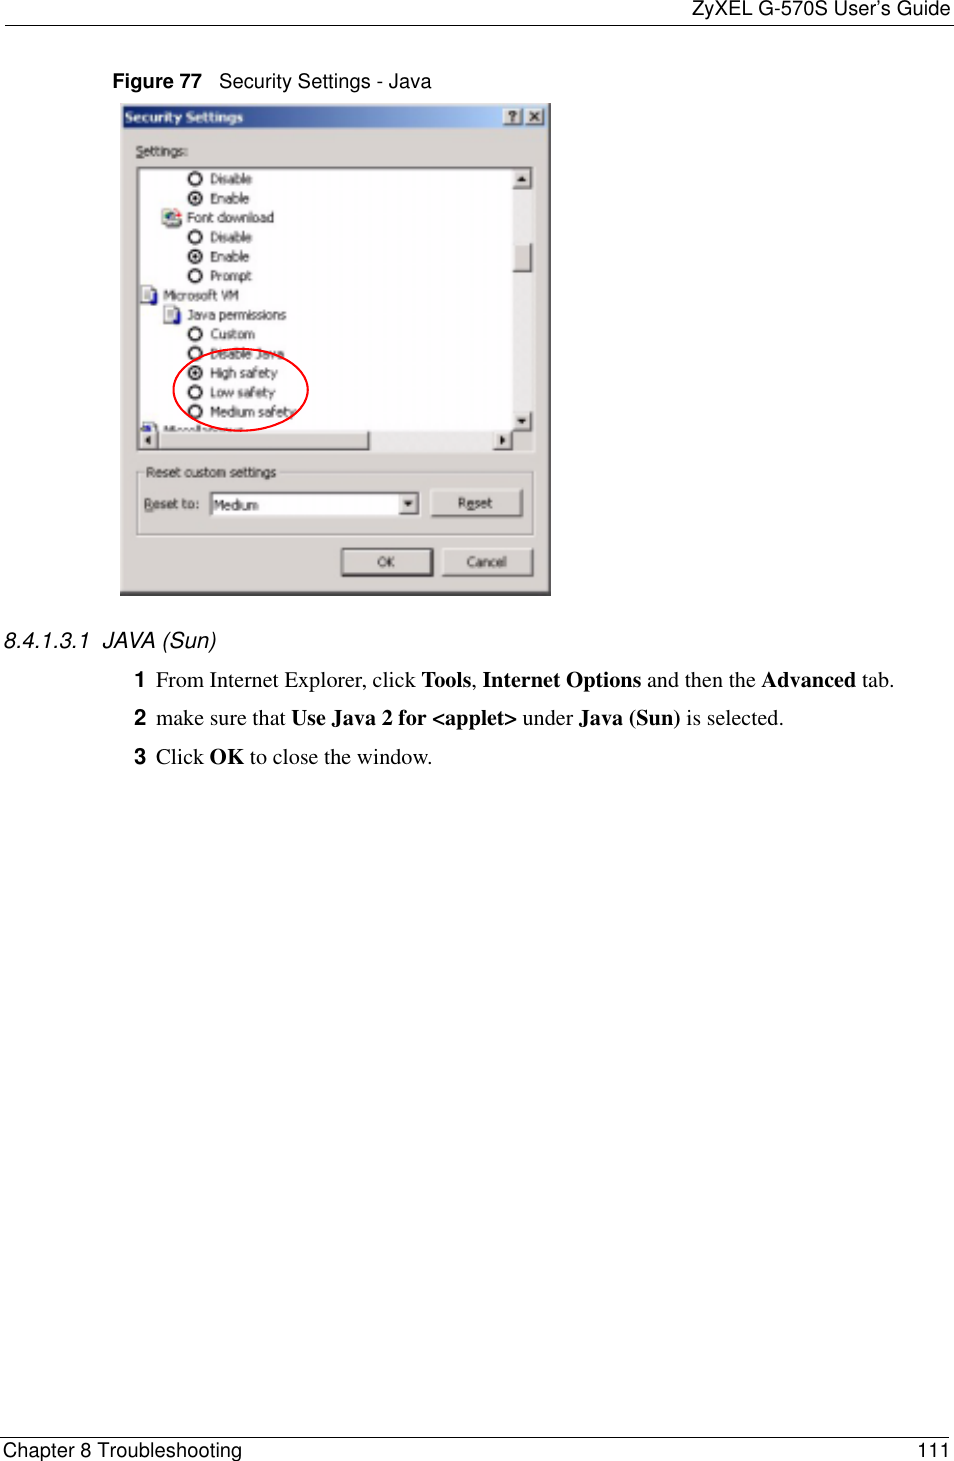 ZyXEL G-570S User’s GuideChapter 8 Troubleshooting 111Figure 77   Security Settings - Java 8.4.1.3.1  JAVA (Sun)1From Internet Explorer, click Tools,Internet Options and then the Advanced tab. 2make sure that Use Java 2 for &lt;applet&gt; under Java (Sun) is selected.3Click OK to close the window.